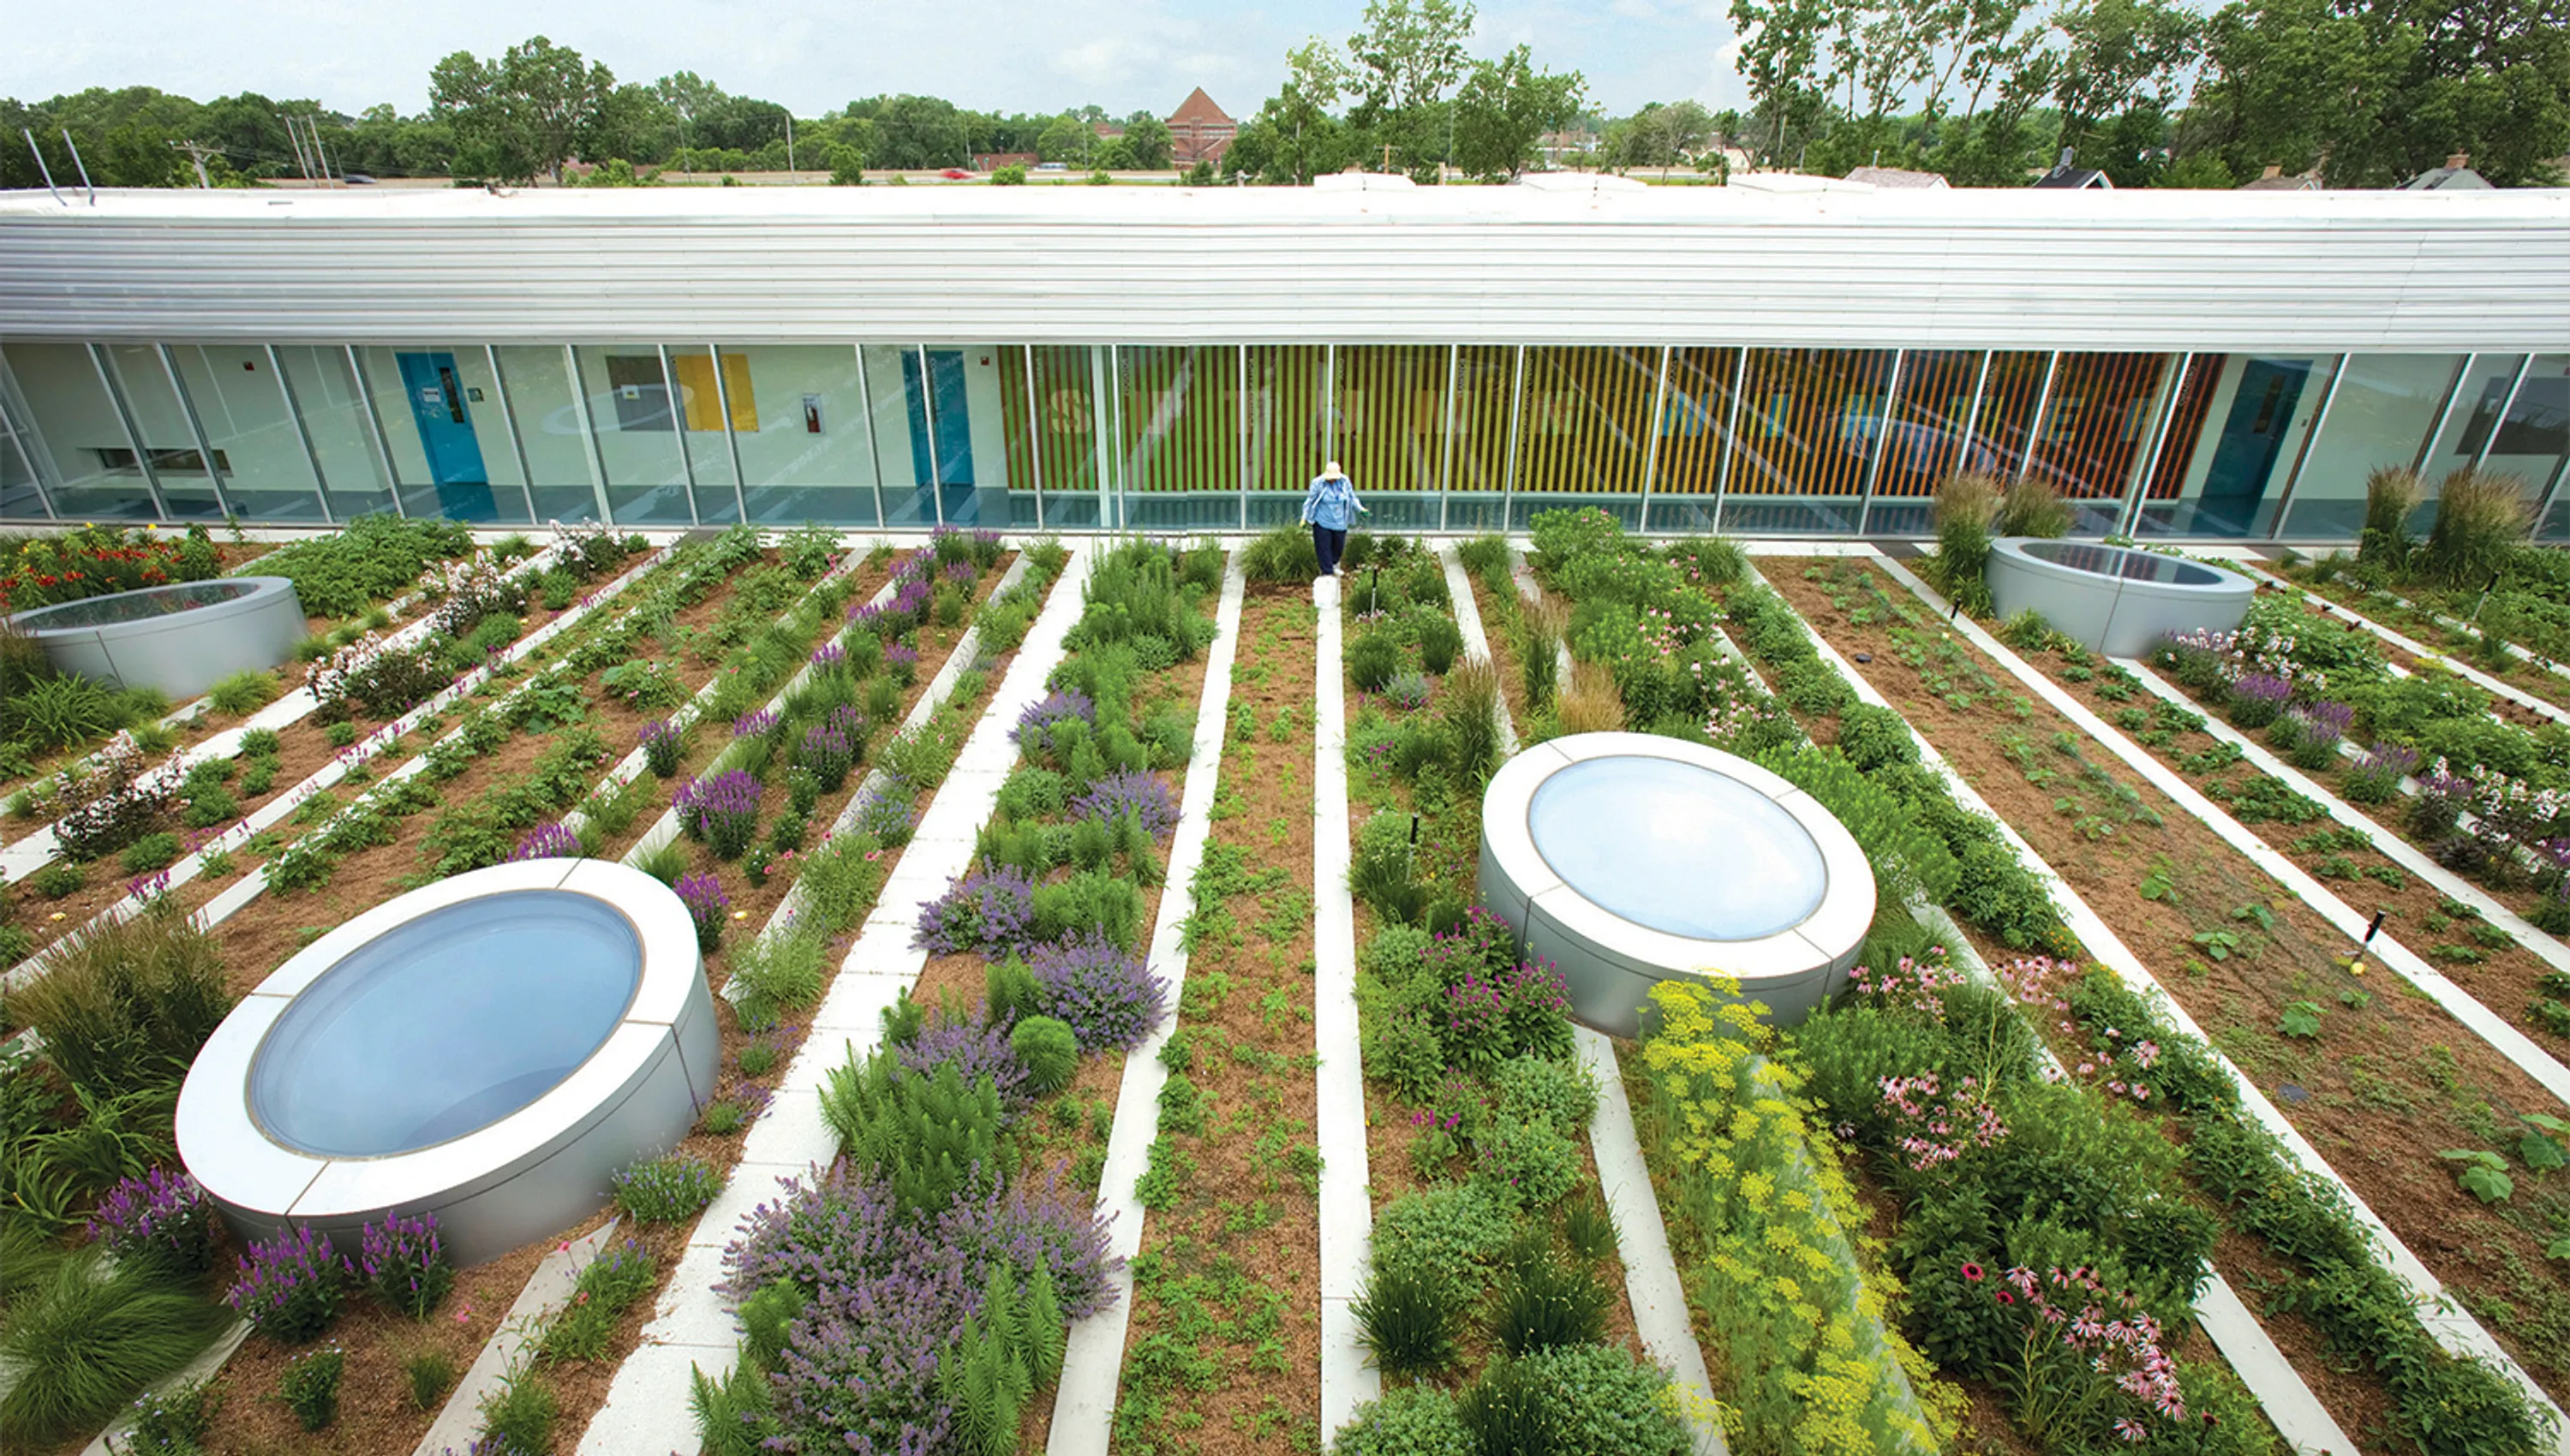 1 Gary Comer Youth Center Roof Garden Featured In The Asla Climate Change Exhibition hoerrschaudt News